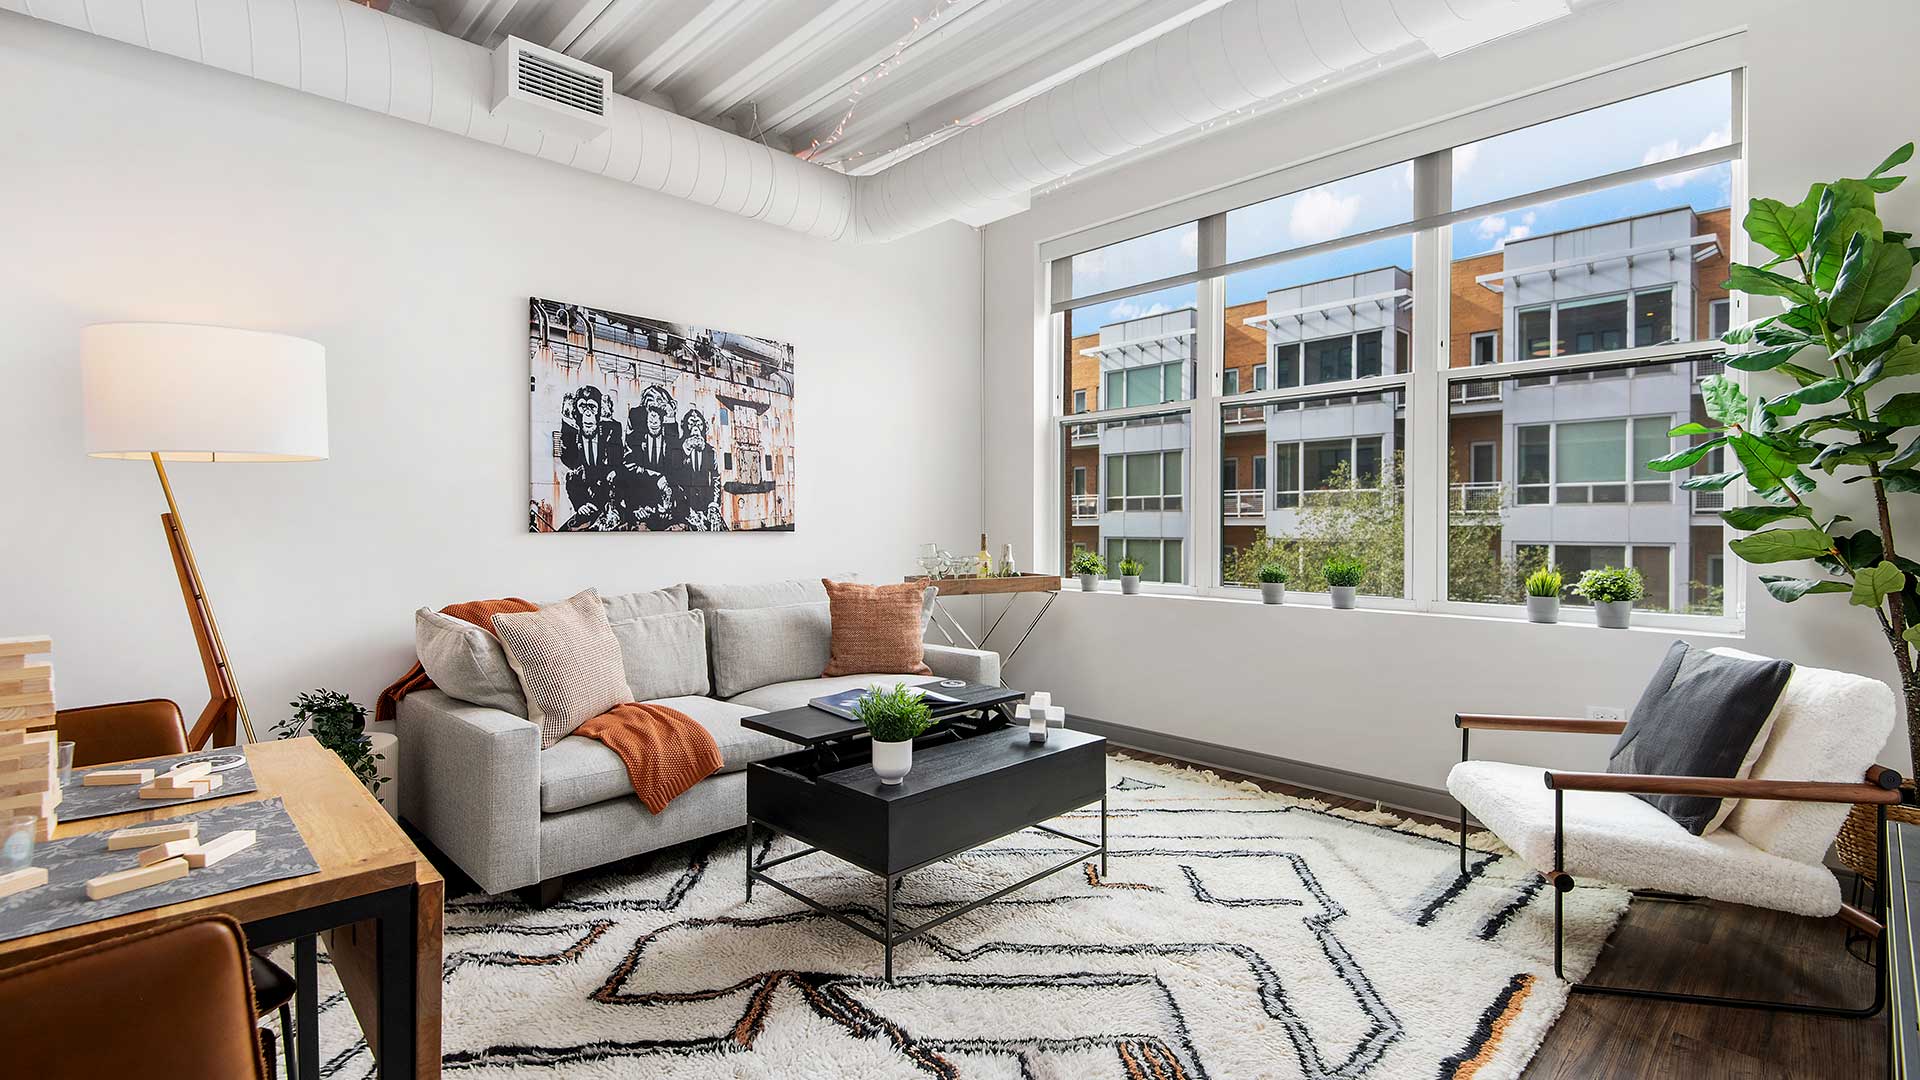 A living room in a residence at Wrigleyville Lofts. A couch and coffee table of off to the left, with a small, sectional table to the near left. Out the windows, to the right, other buildings are seen on a bright day.